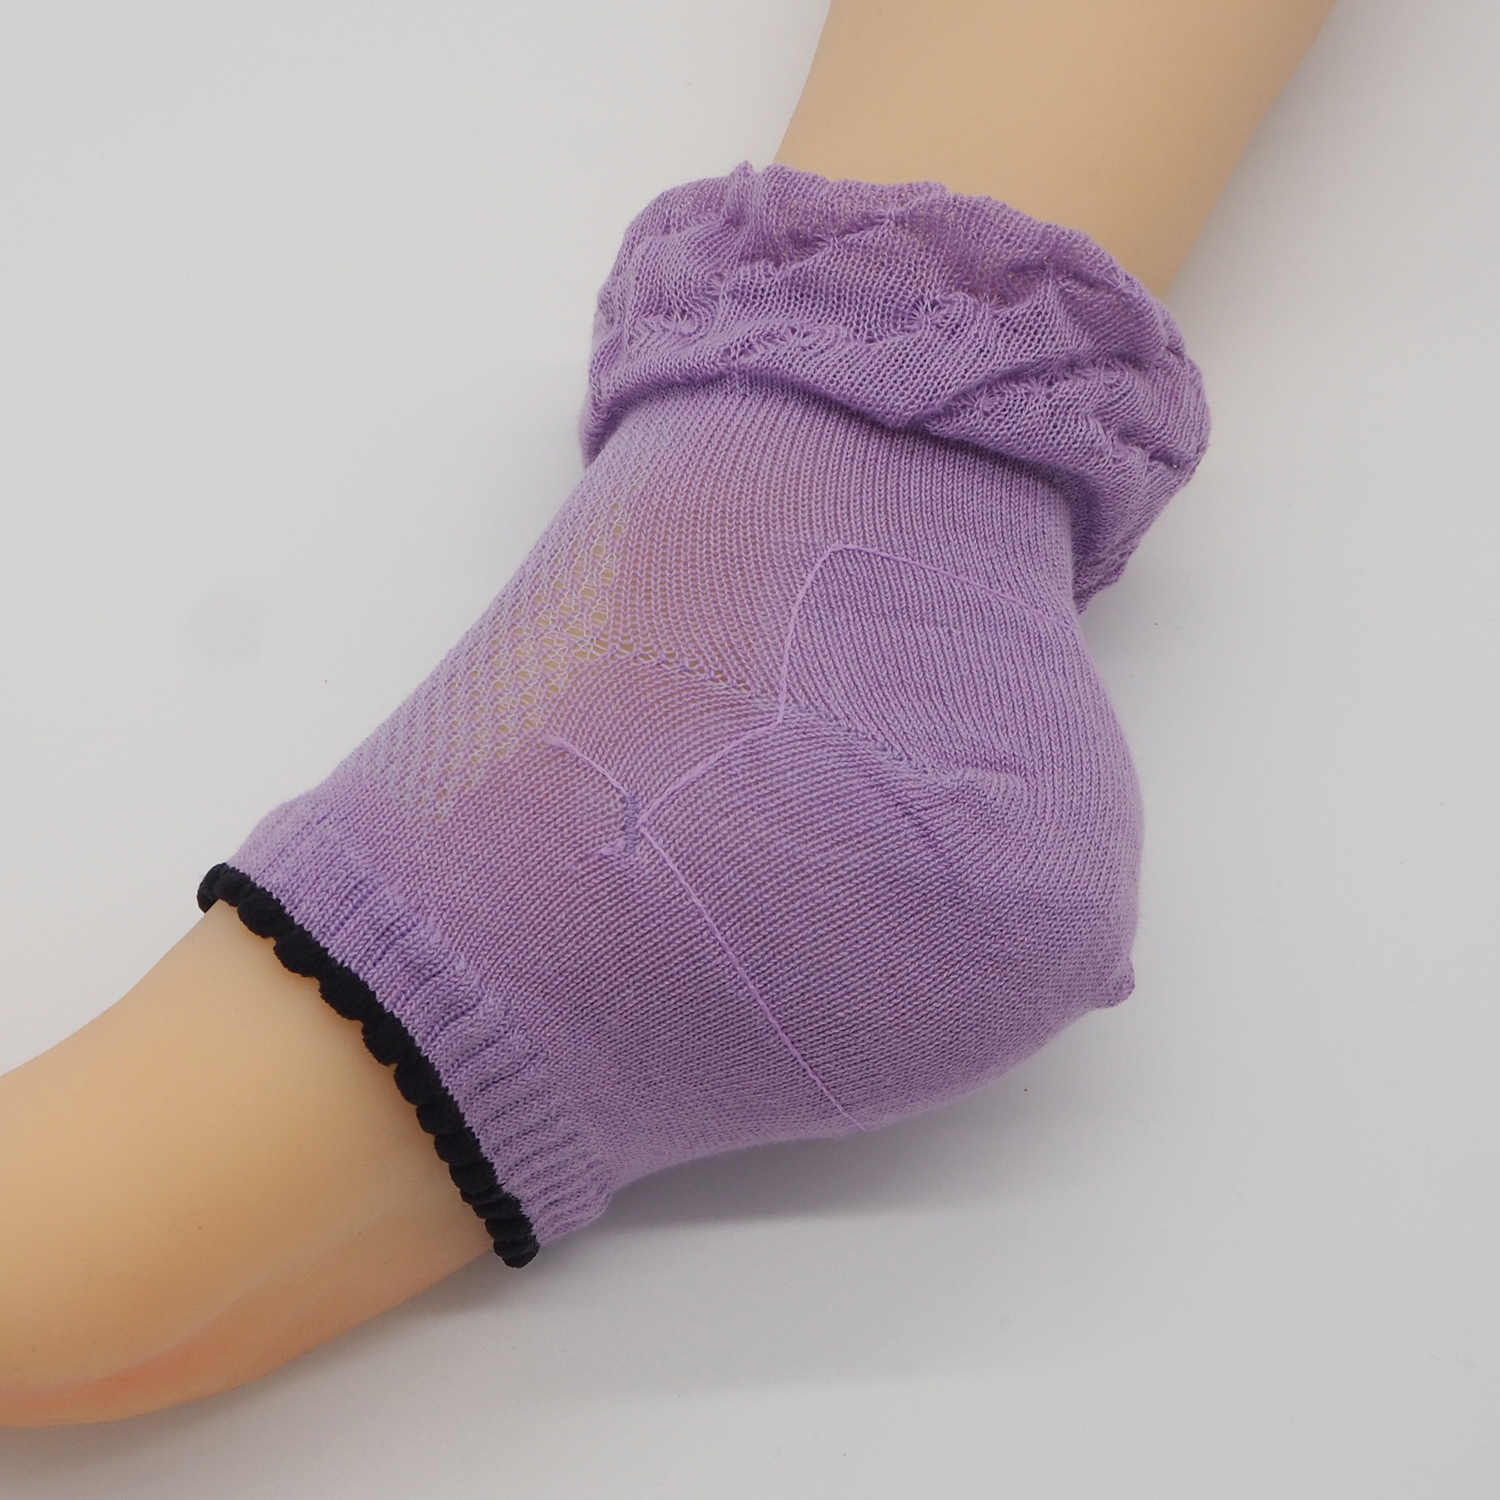 Heel-Smoothing Socks for bed - 842